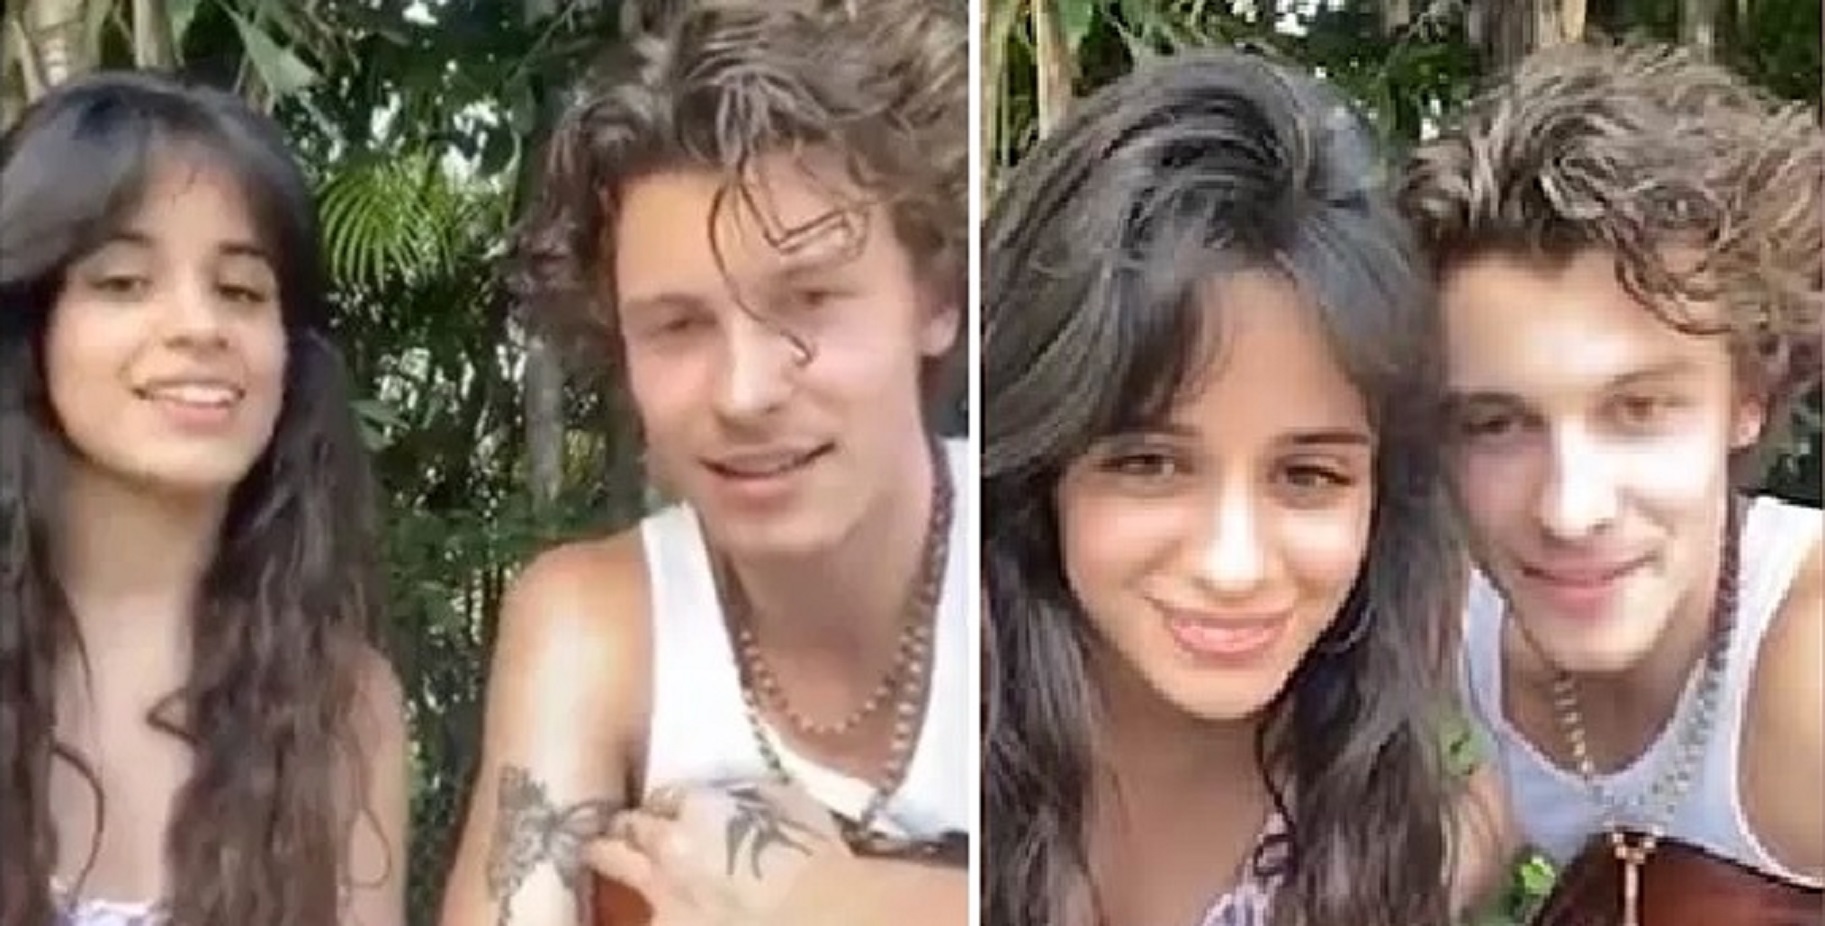 Did You Miss It? Camila Cabello and Shawn Mendes Give Free Visual Concert For Fans Amidst Coronavirus Quarantine!